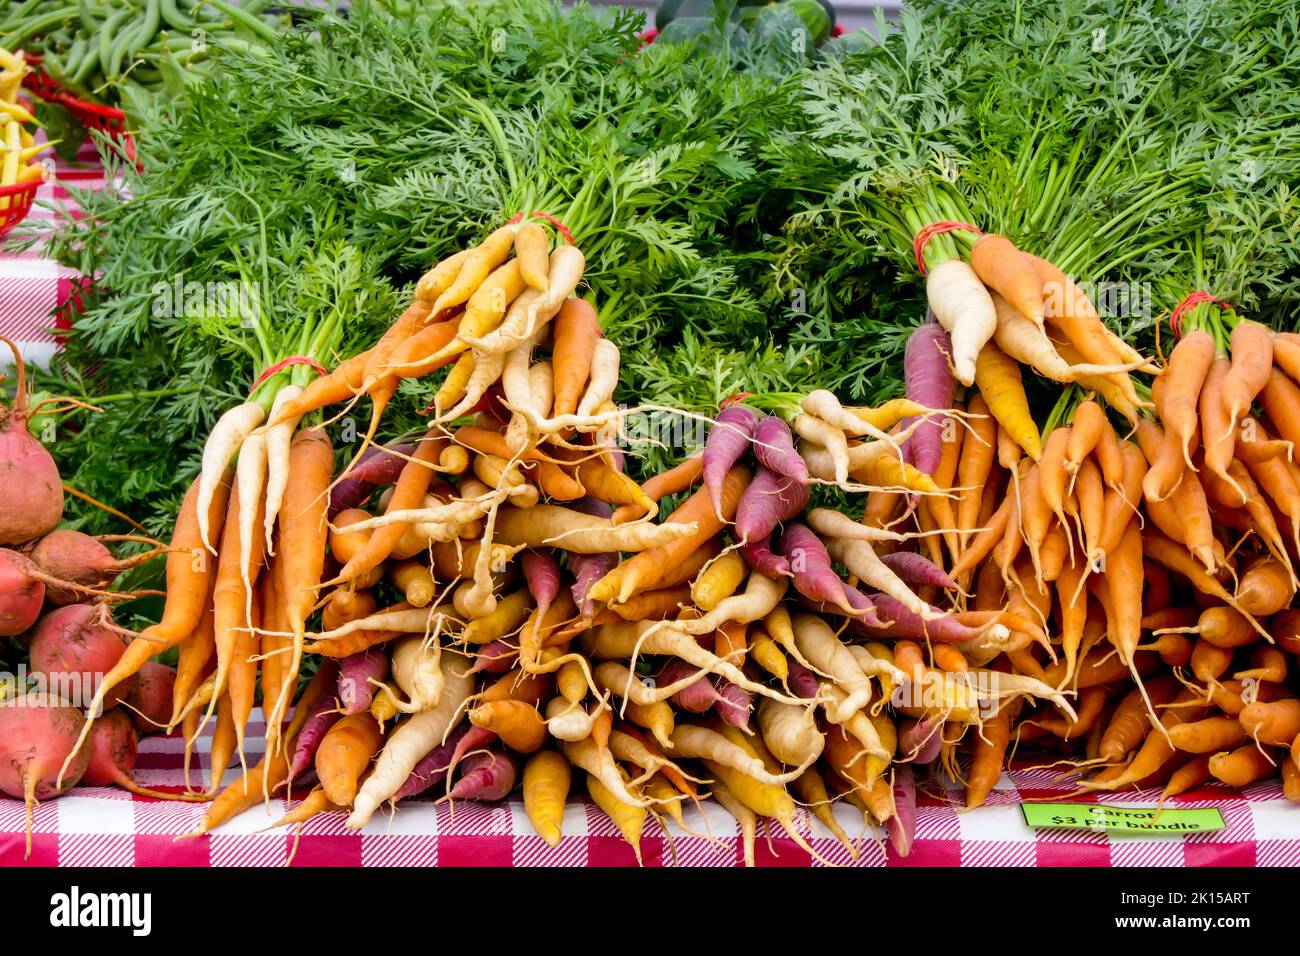 Multi-colored carrots for sale at farmers market. Stock Photo